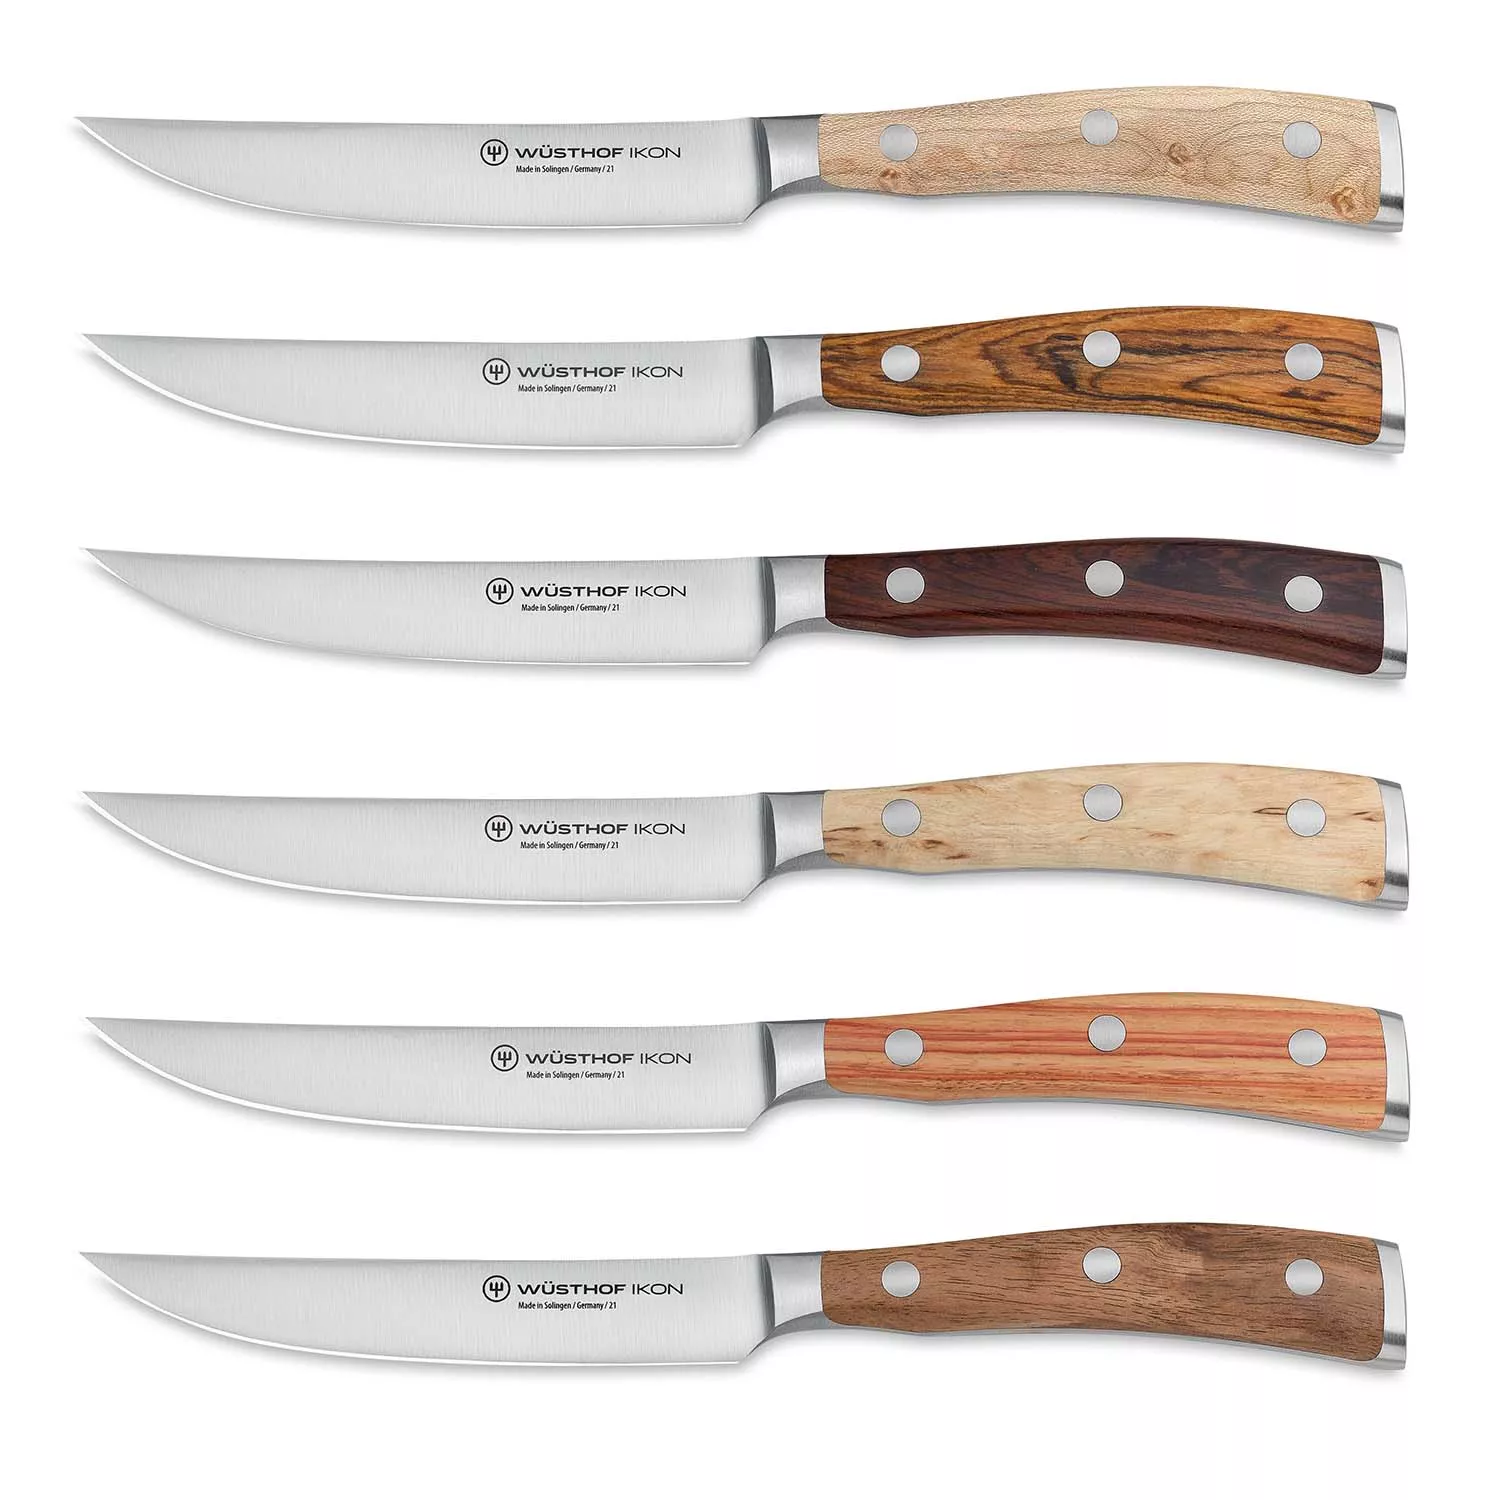 Set of 6 Table, Steak, Pizza & Fruit Knives Made in Italy